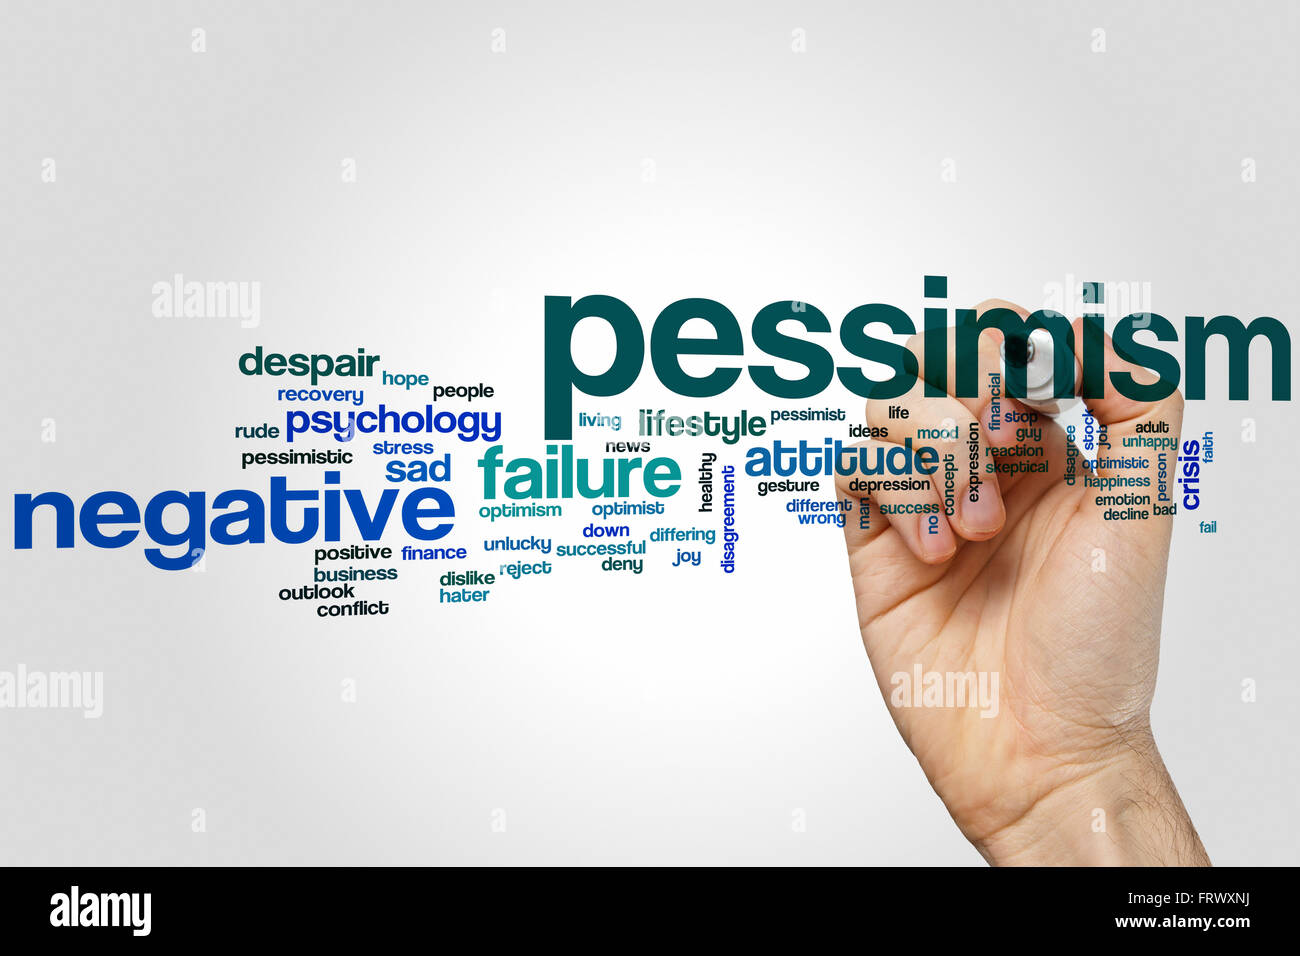 Pessimism word cloud concept with negative attitude related tags Stock Photo